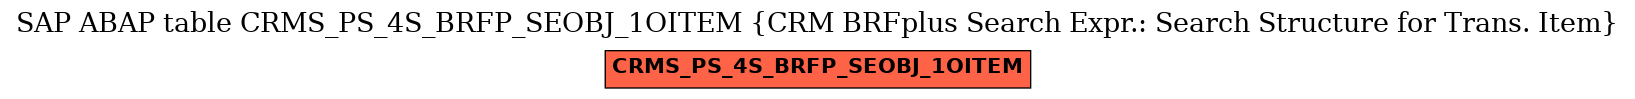 E-R Diagram for table CRMS_PS_4S_BRFP_SEOBJ_1OITEM (CRM BRFplus Search Expr.: Search Structure for Trans. Item)